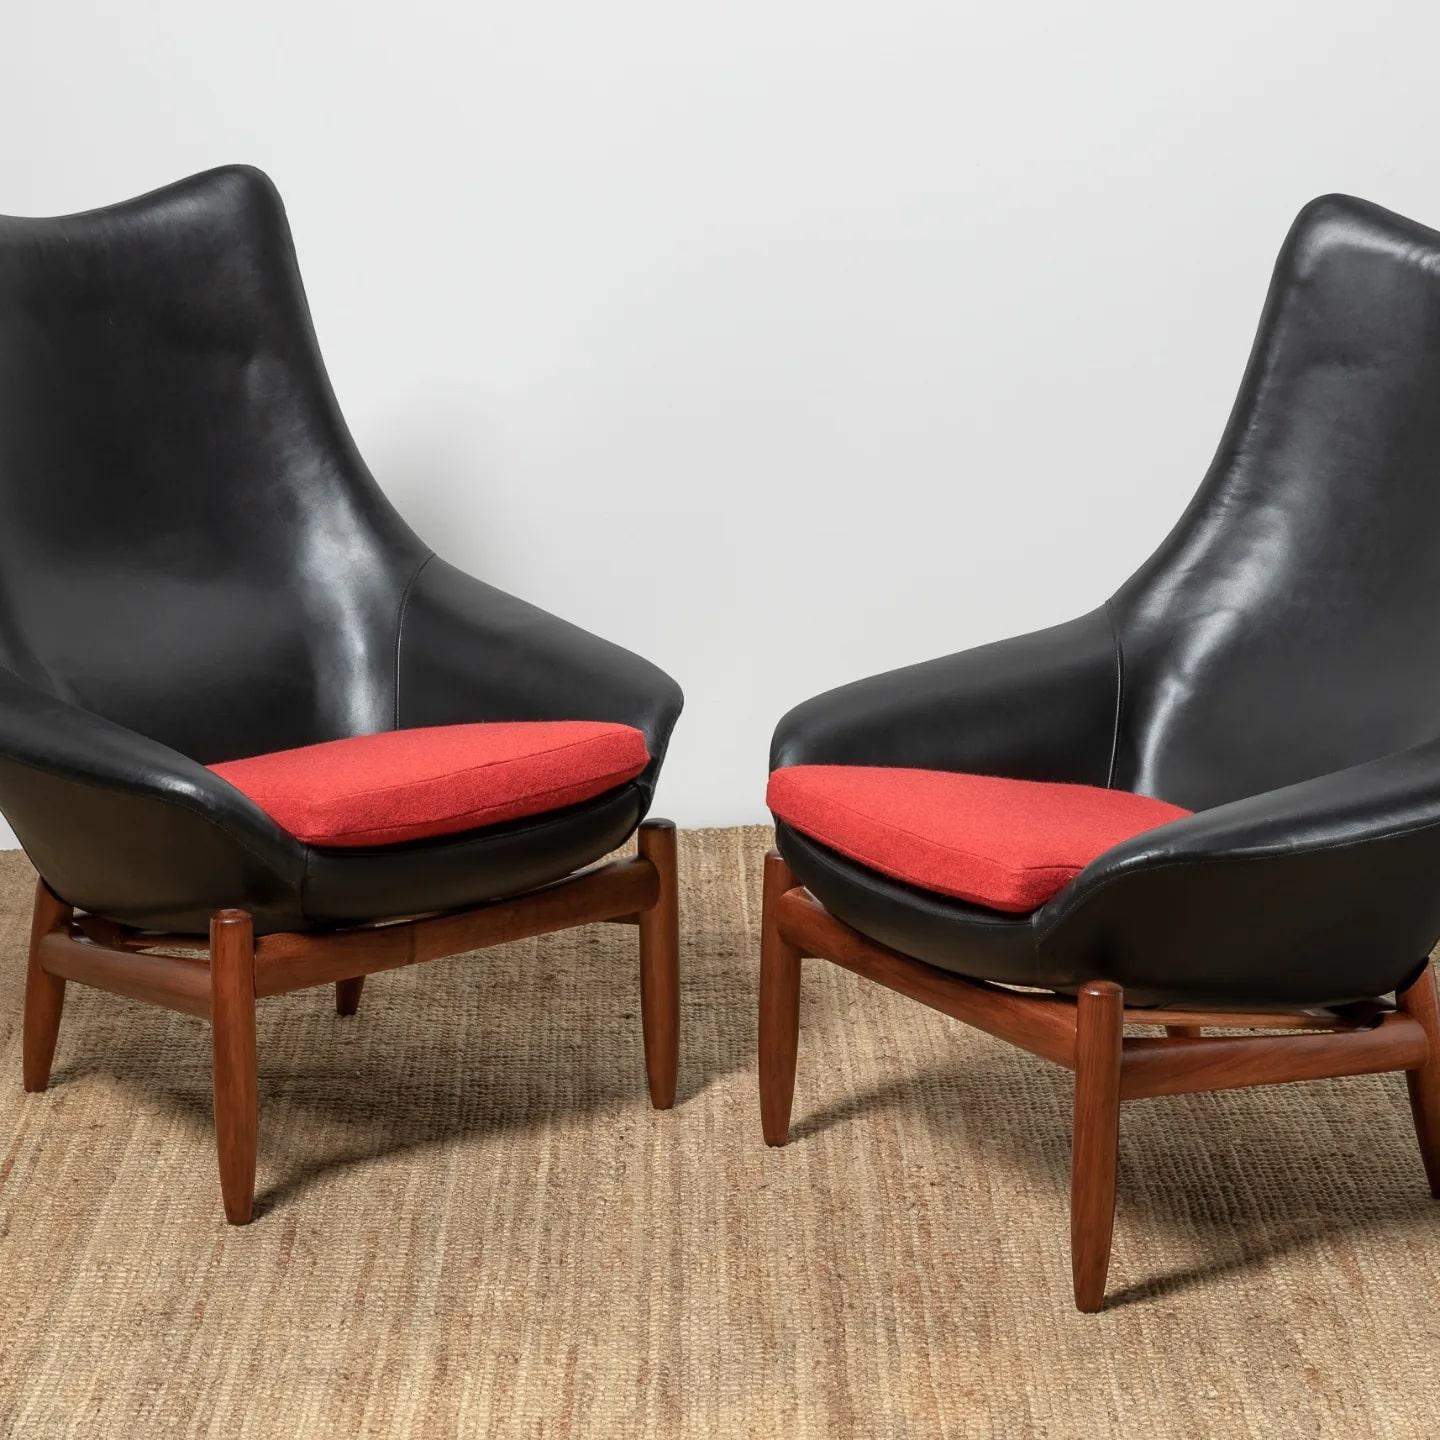 Product Description Title:
Danish Deluxe was founded in Melbourne in the 1950s and is responsible for designing and manufacturing high-end Danish styled furniture with an Australian twist

A beautiful set two matching high back armchairs (price is